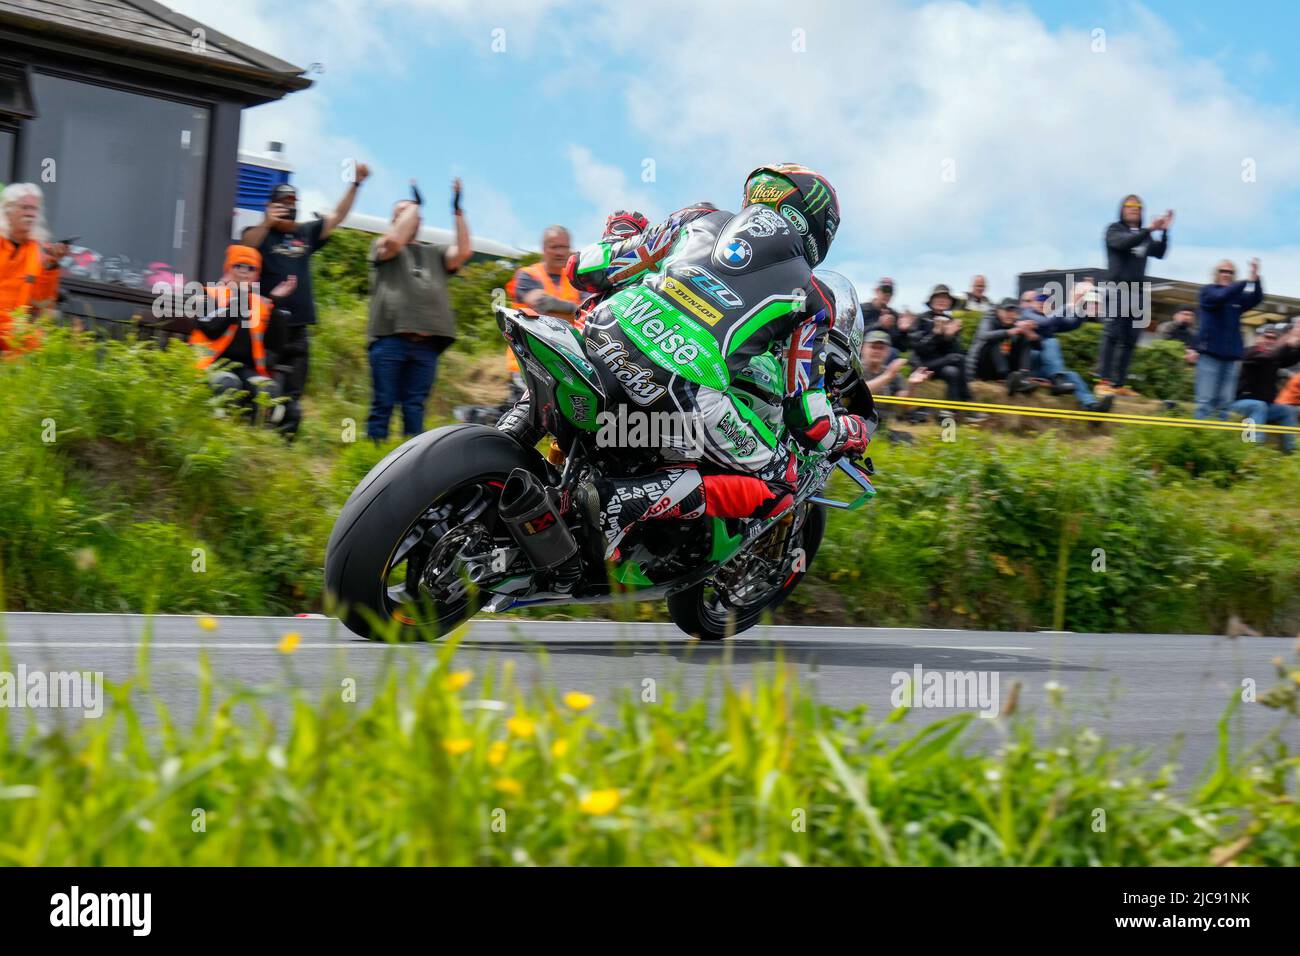 Douglas, Isle Of Man. 11th June, 2022. Peter Hickman (1000 BMW) representing the Gas Monkey Garage by FHO Racing team waves to fans in the last lap of the 2022 Milwaukee Senior TT at the Isle of Man, Douglas, Isle of Man on the 11 June 2022. Photo by David Horn. Credit: PRiME Media Images/Alamy Live News Stock Photo